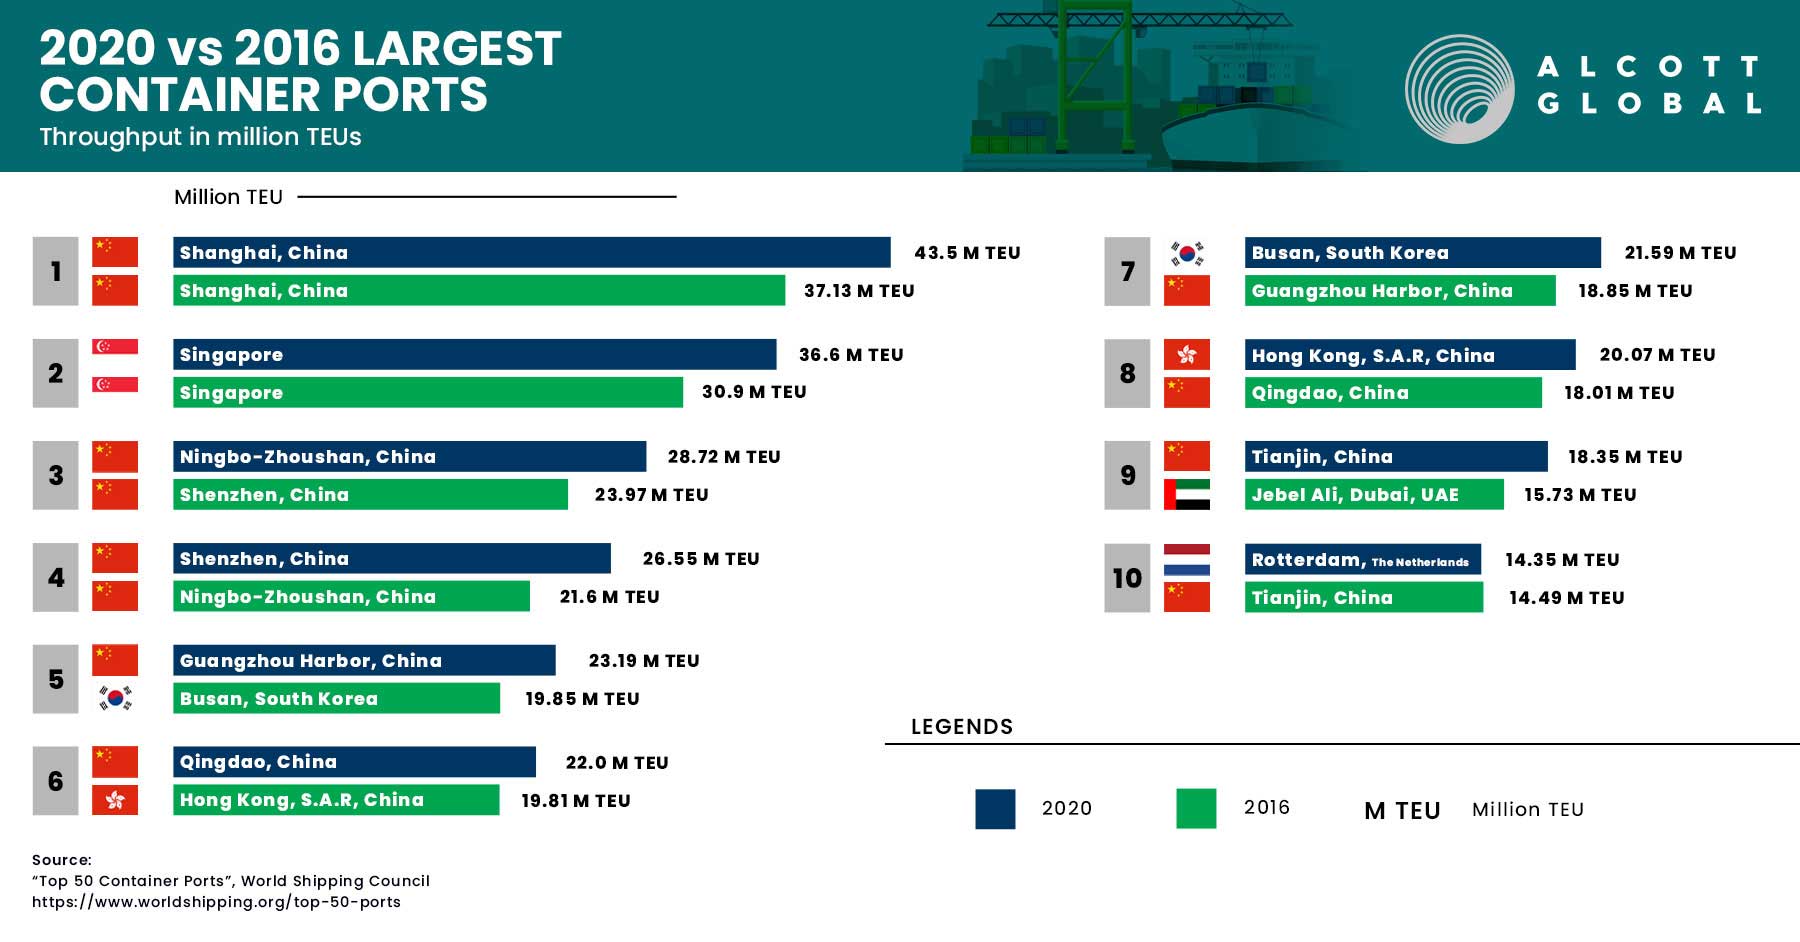 Top 10 - World's Largest Container Ports in 2020 vs. 2016 Featured Image